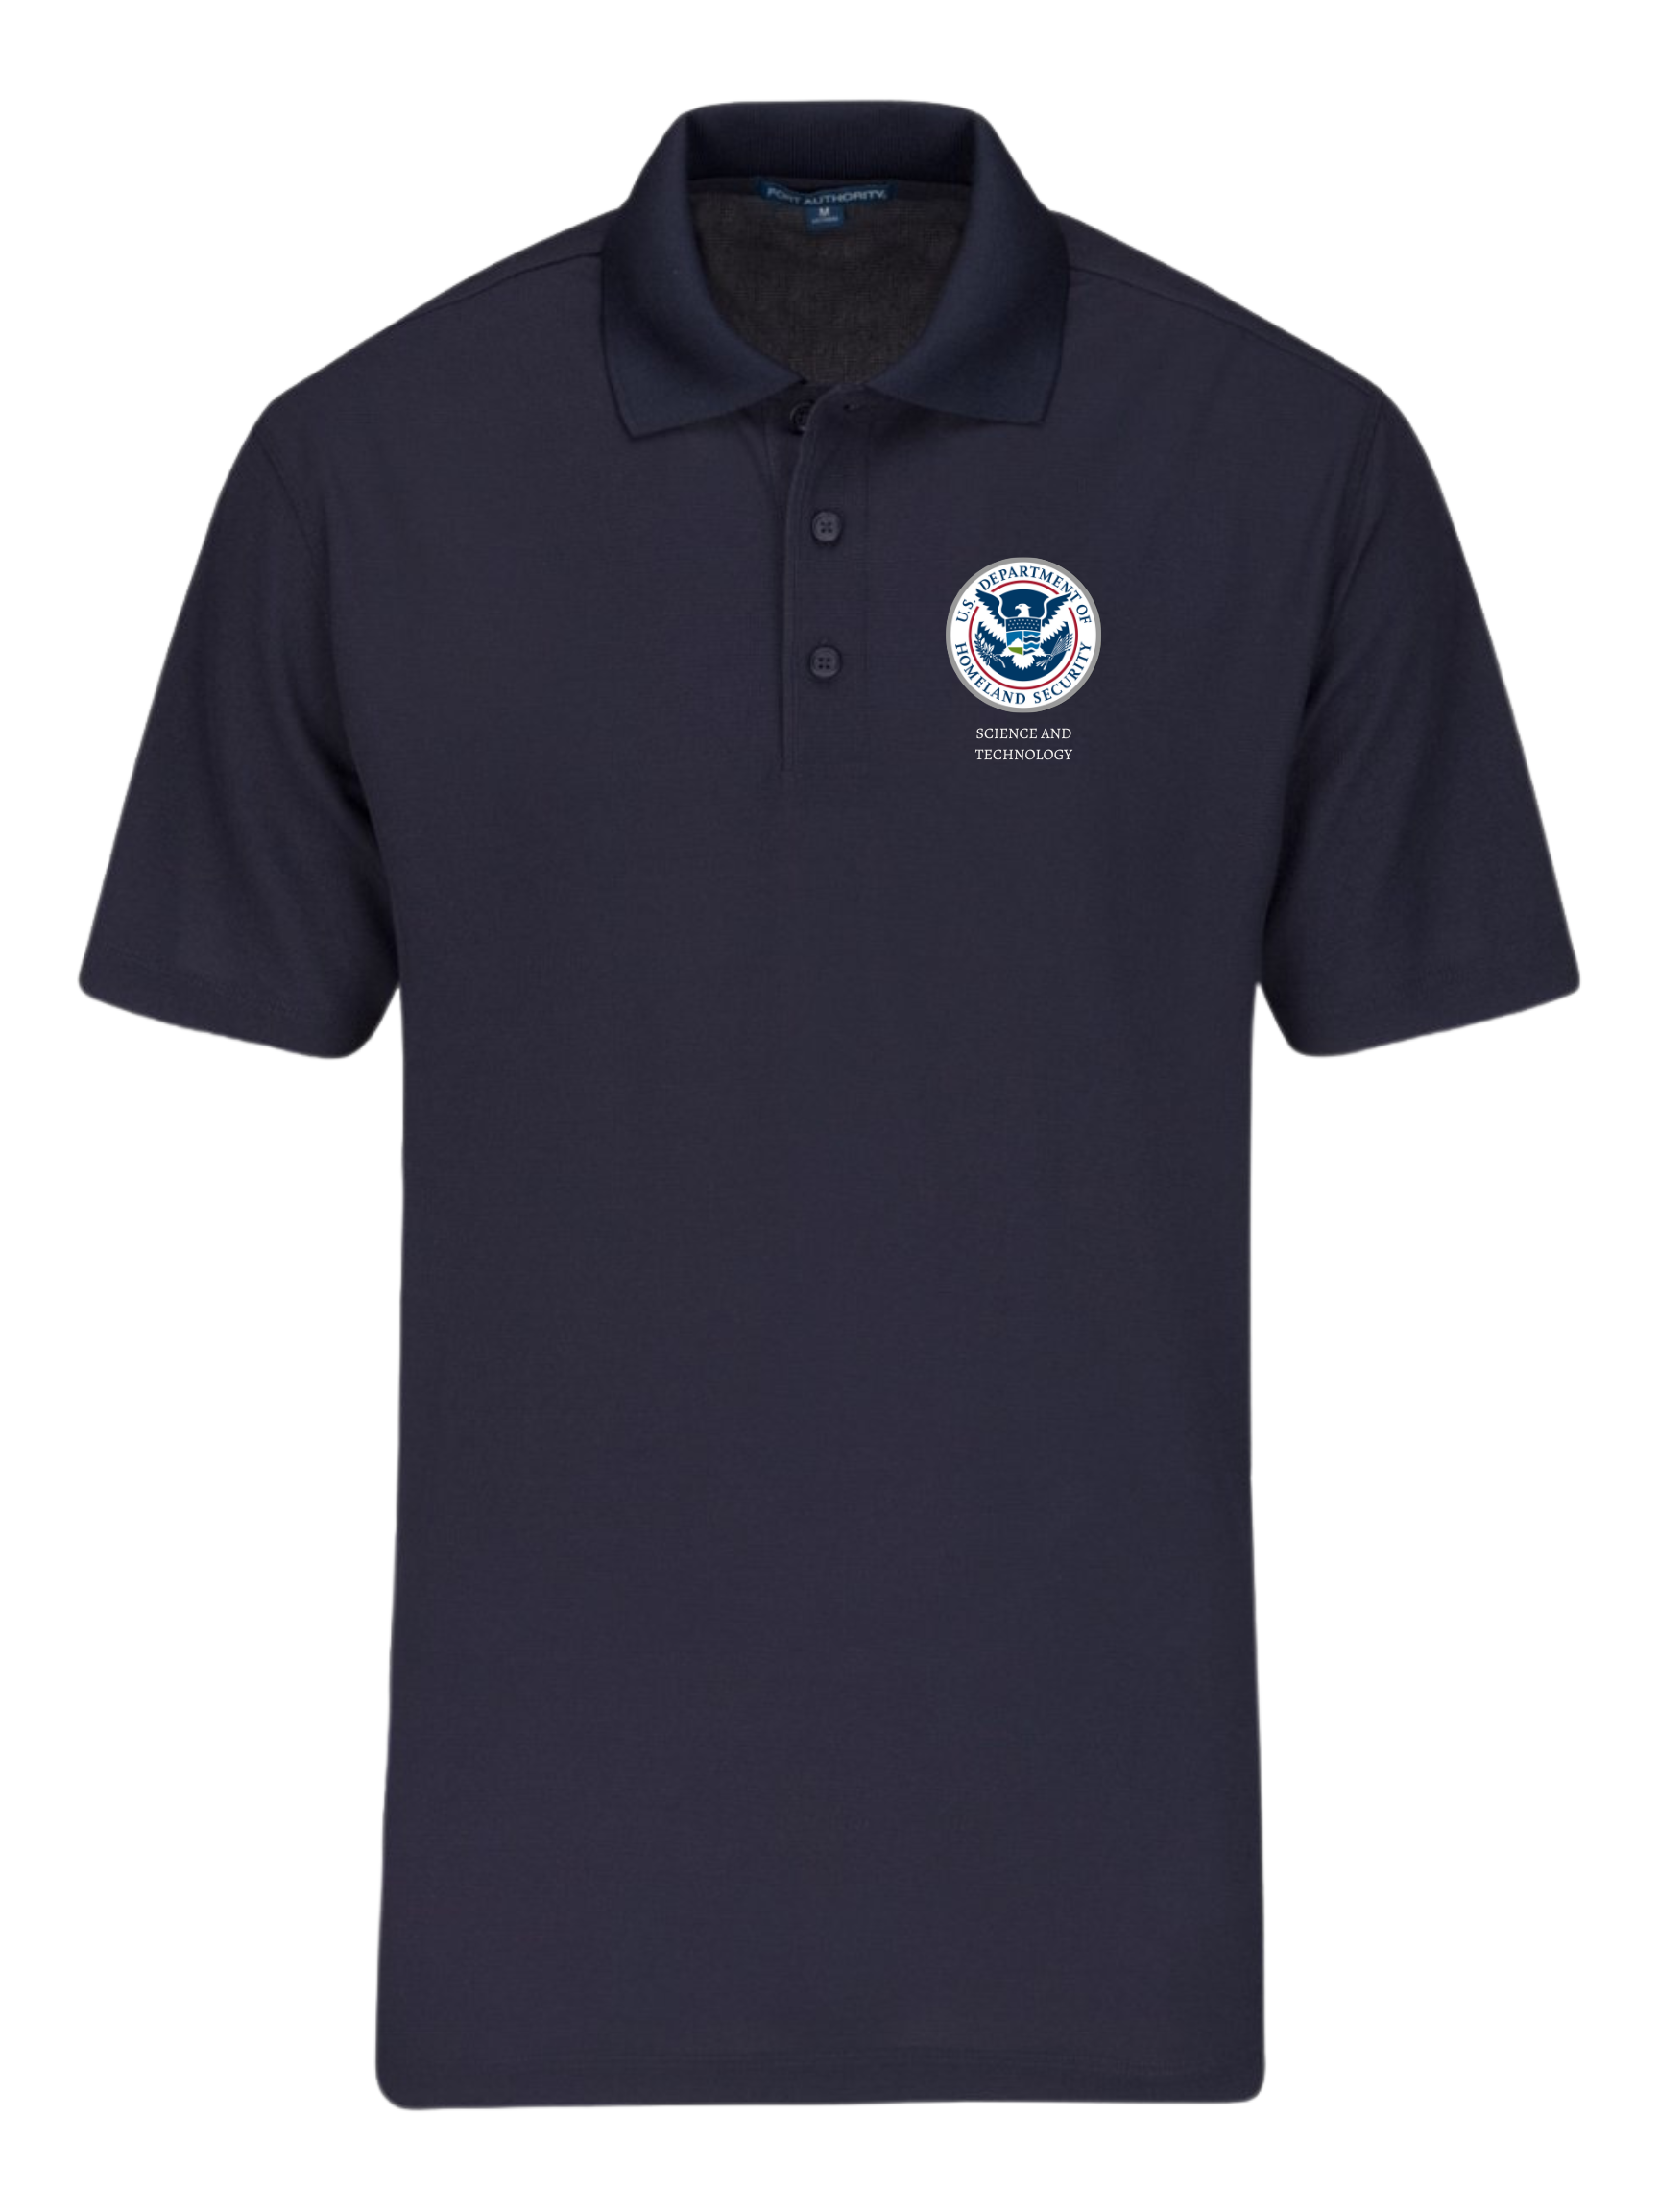 S&T - DHS Employee Polo Shirt - Federal Emergency Management ...